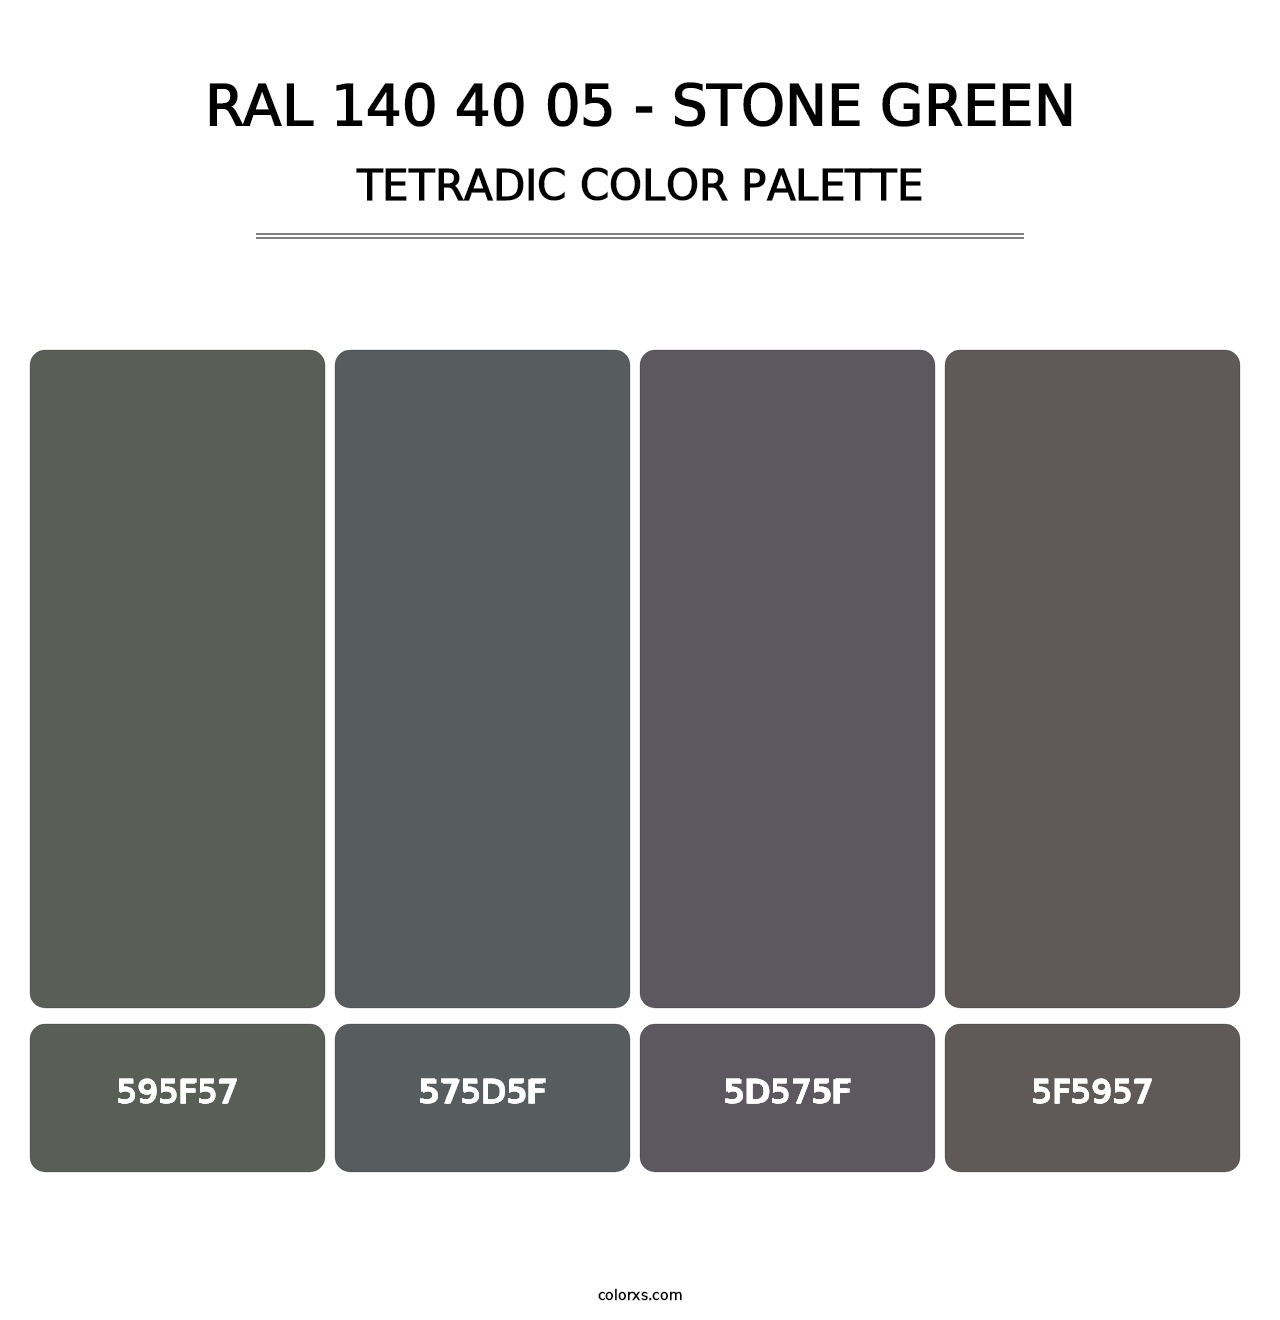 RAL 140 40 05 - Stone Green - Tetradic Color Palette